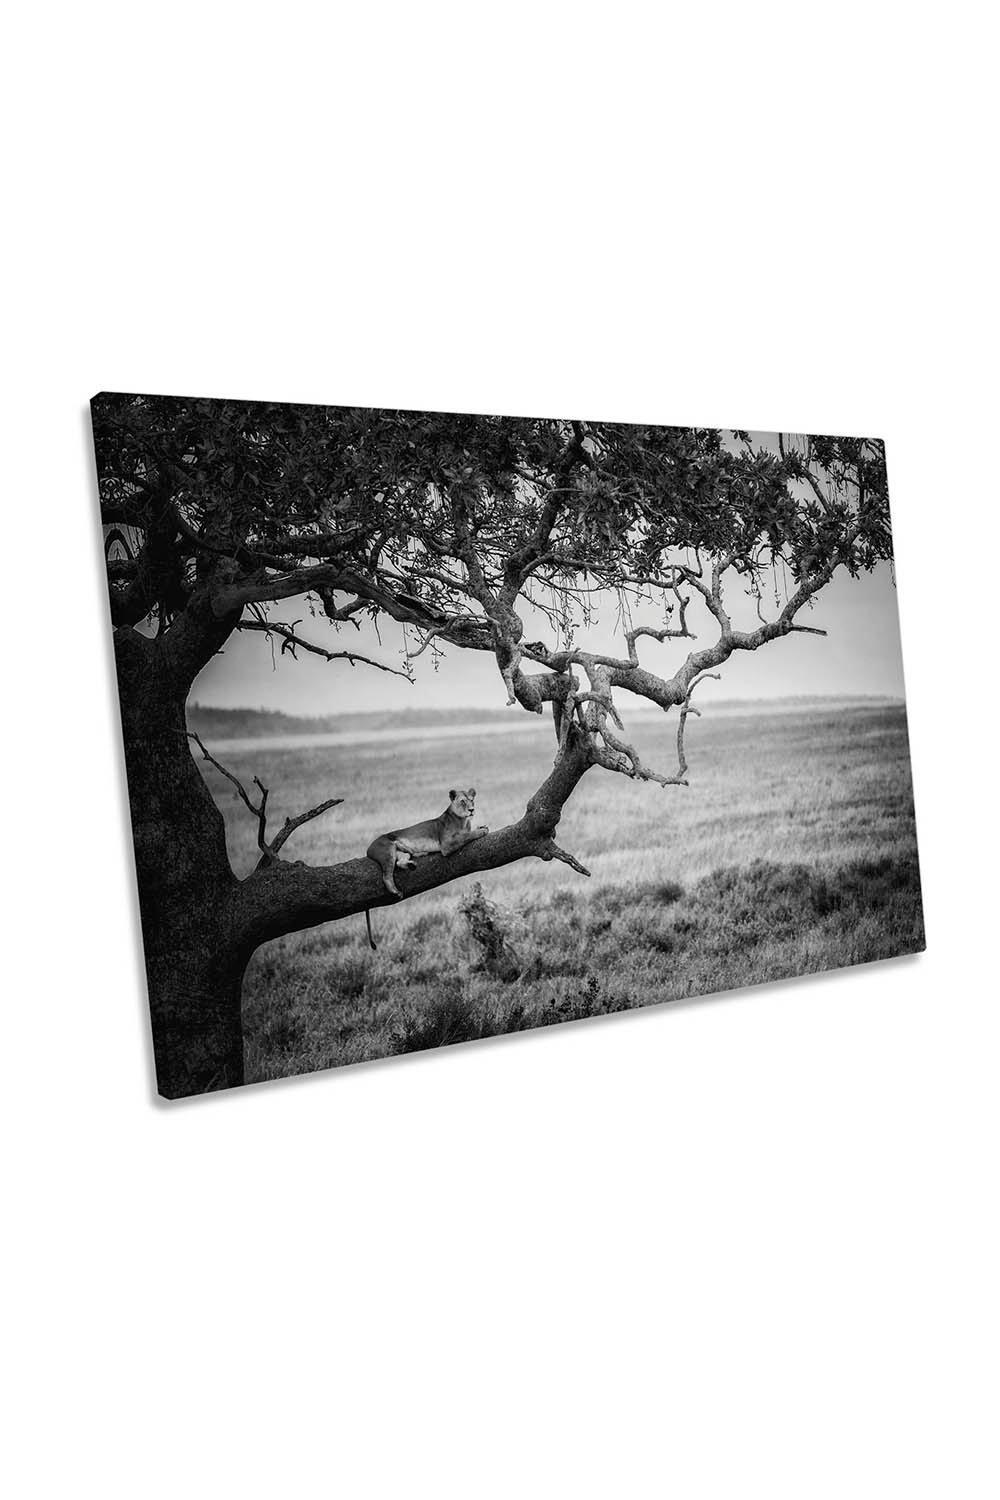 The Queen Lion Lioness Tree Wildlife Canvas Wall Art Picture Print